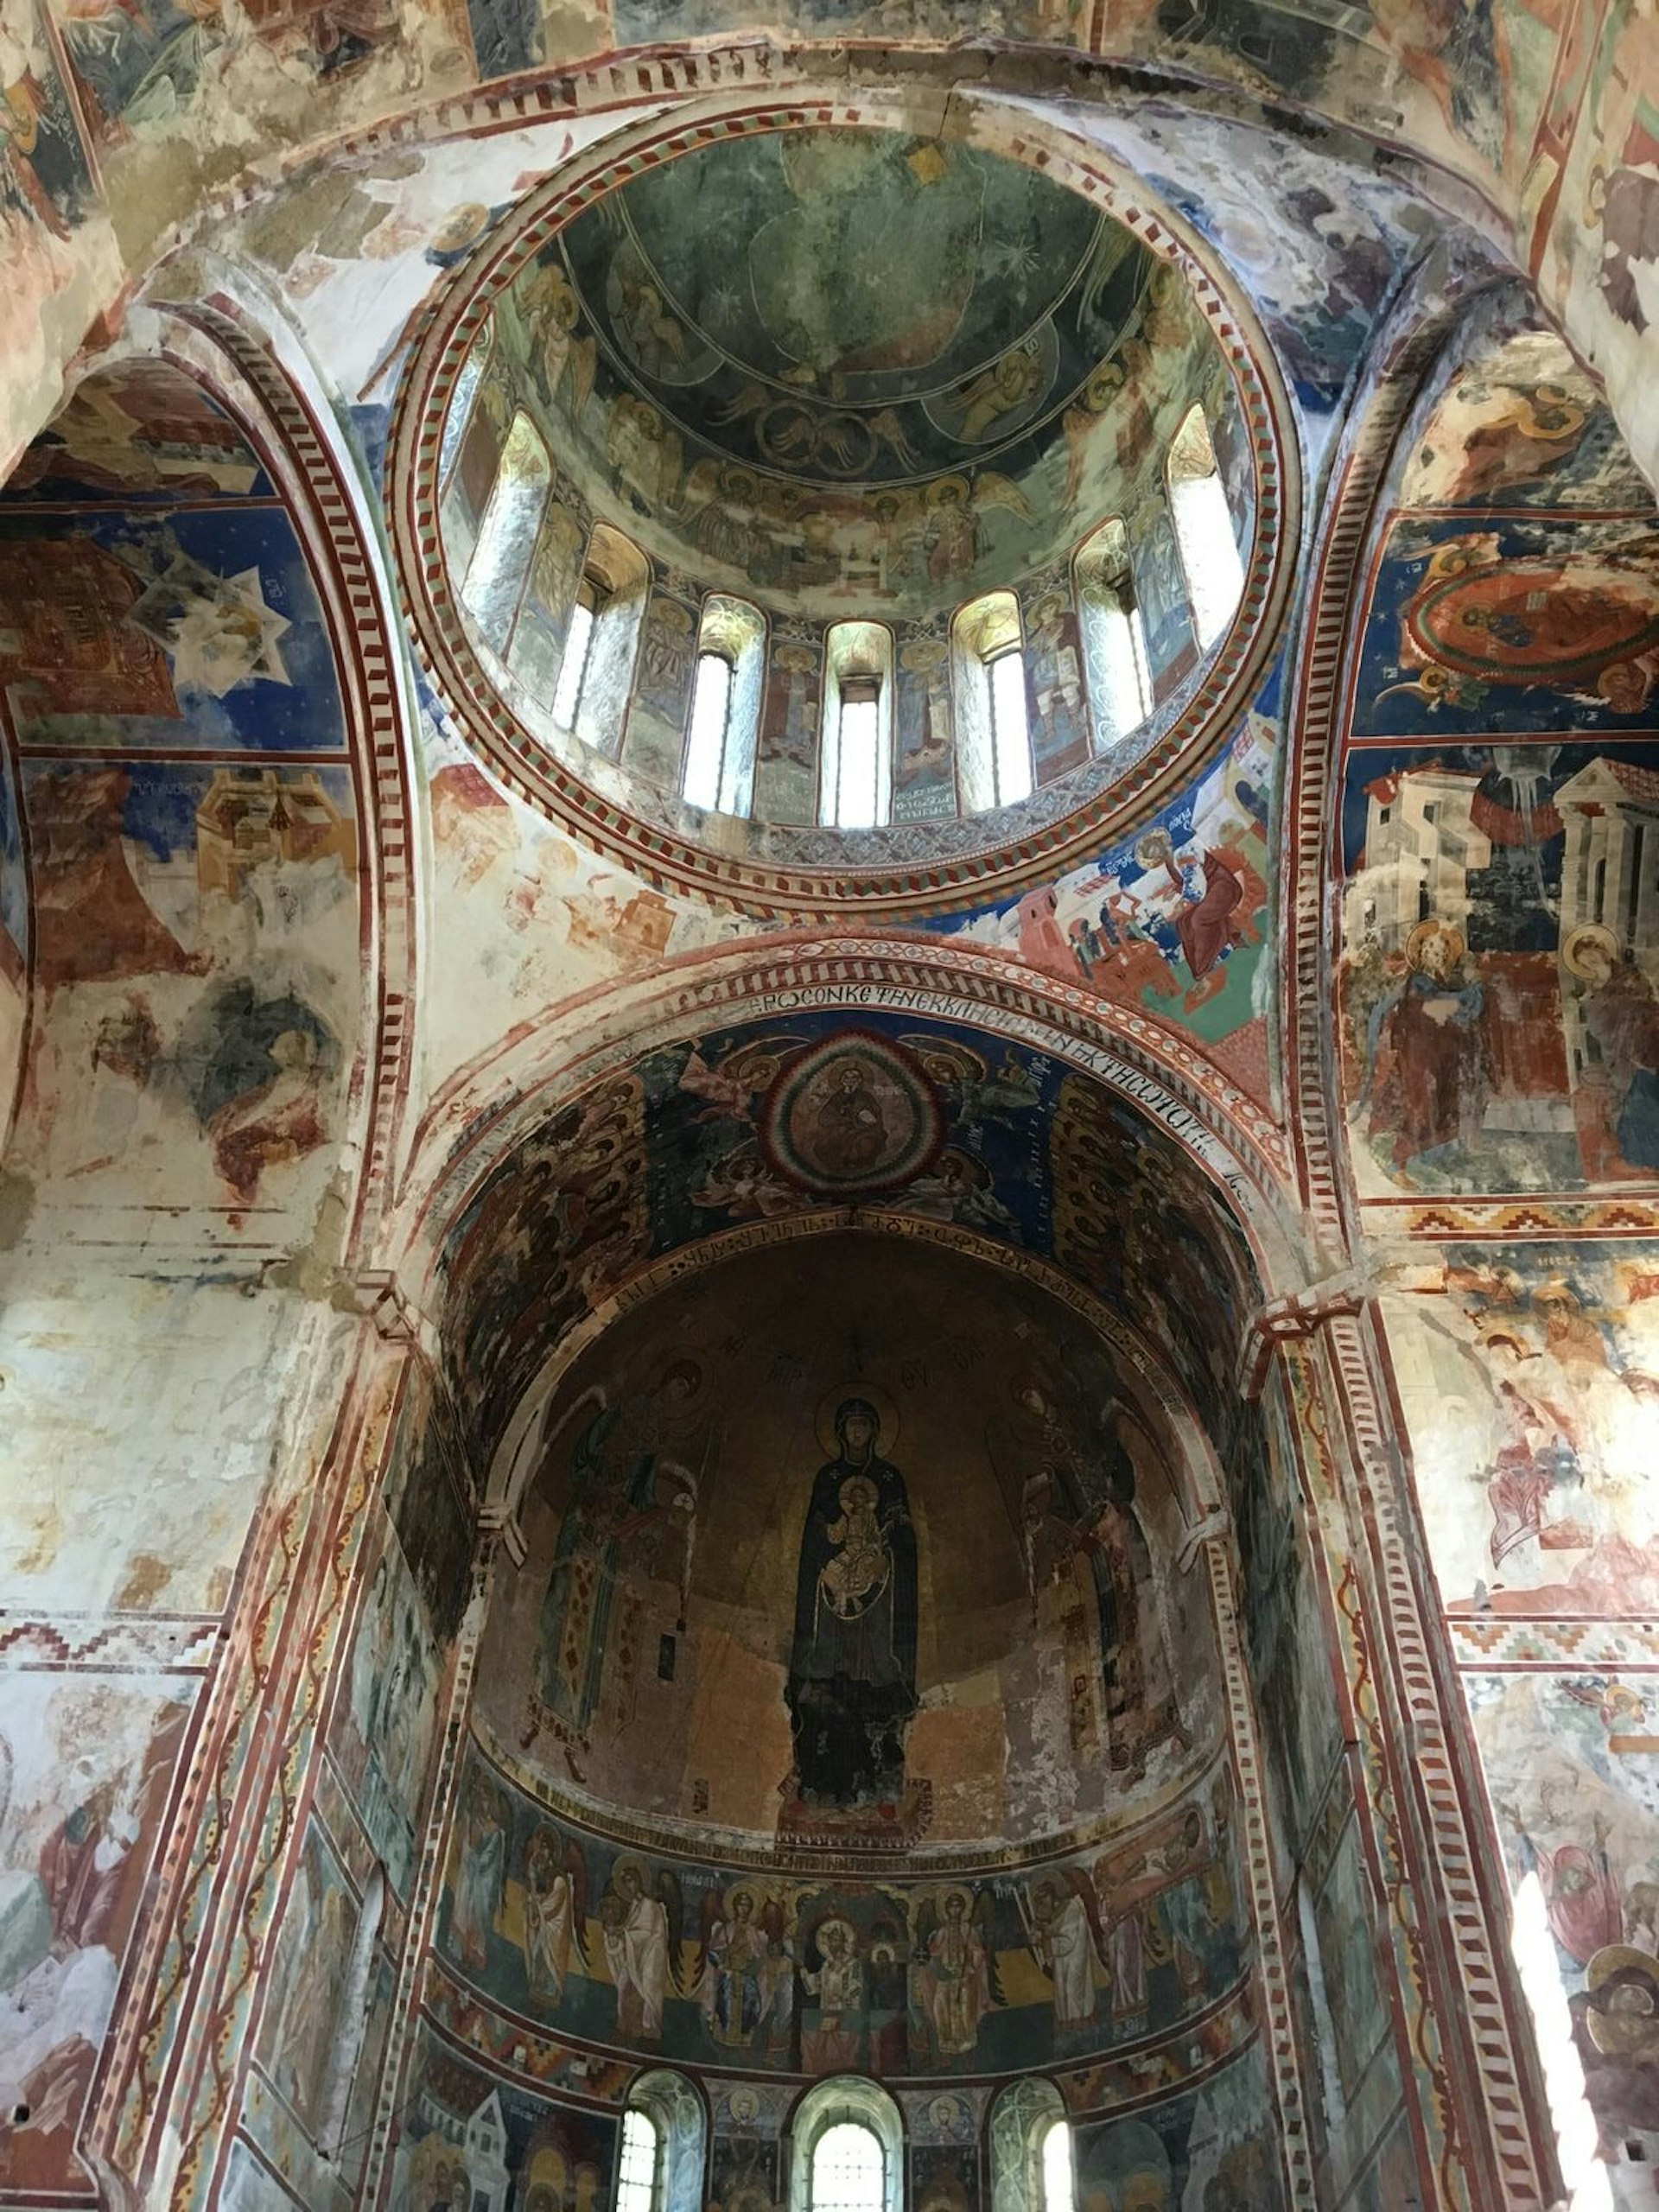 Upwards angle towards the dome inside Unesco-listed Gelati Monastery, showing colourful religious frescoes preserved on the walls and ceilings inside